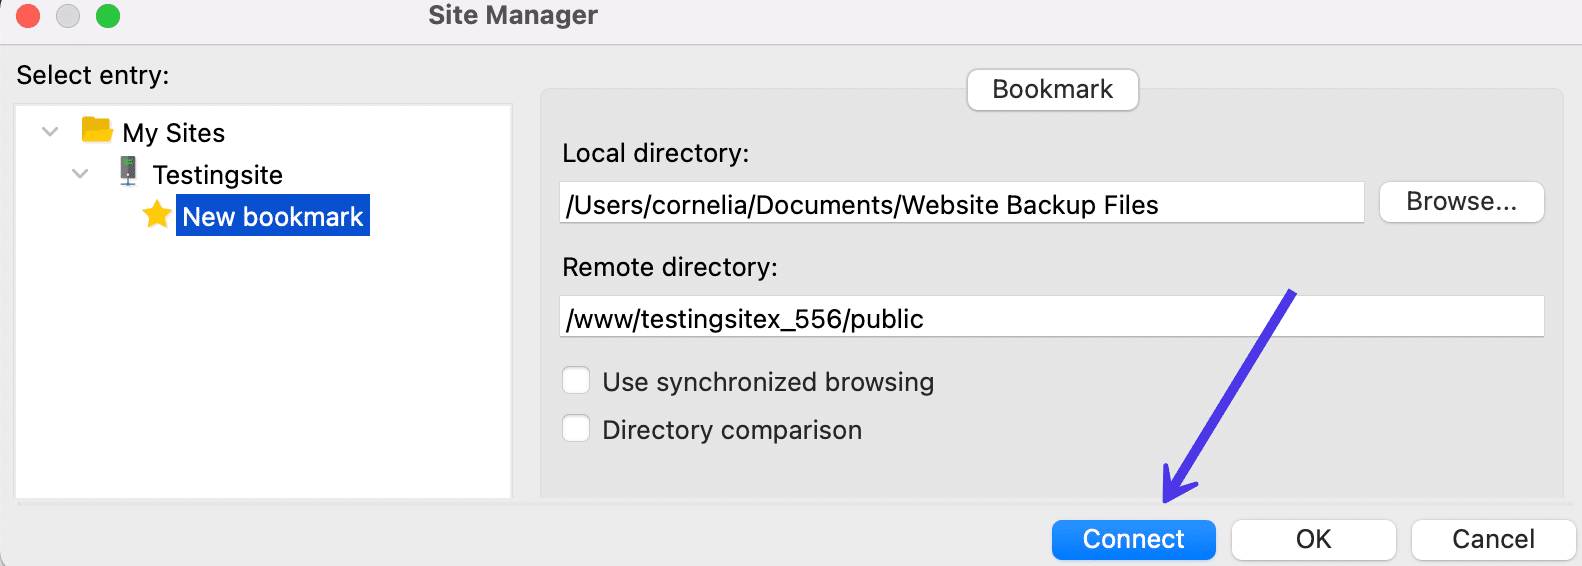 Click Connect in the Site Manager to move away from what you're doing and towards the save bookmark.